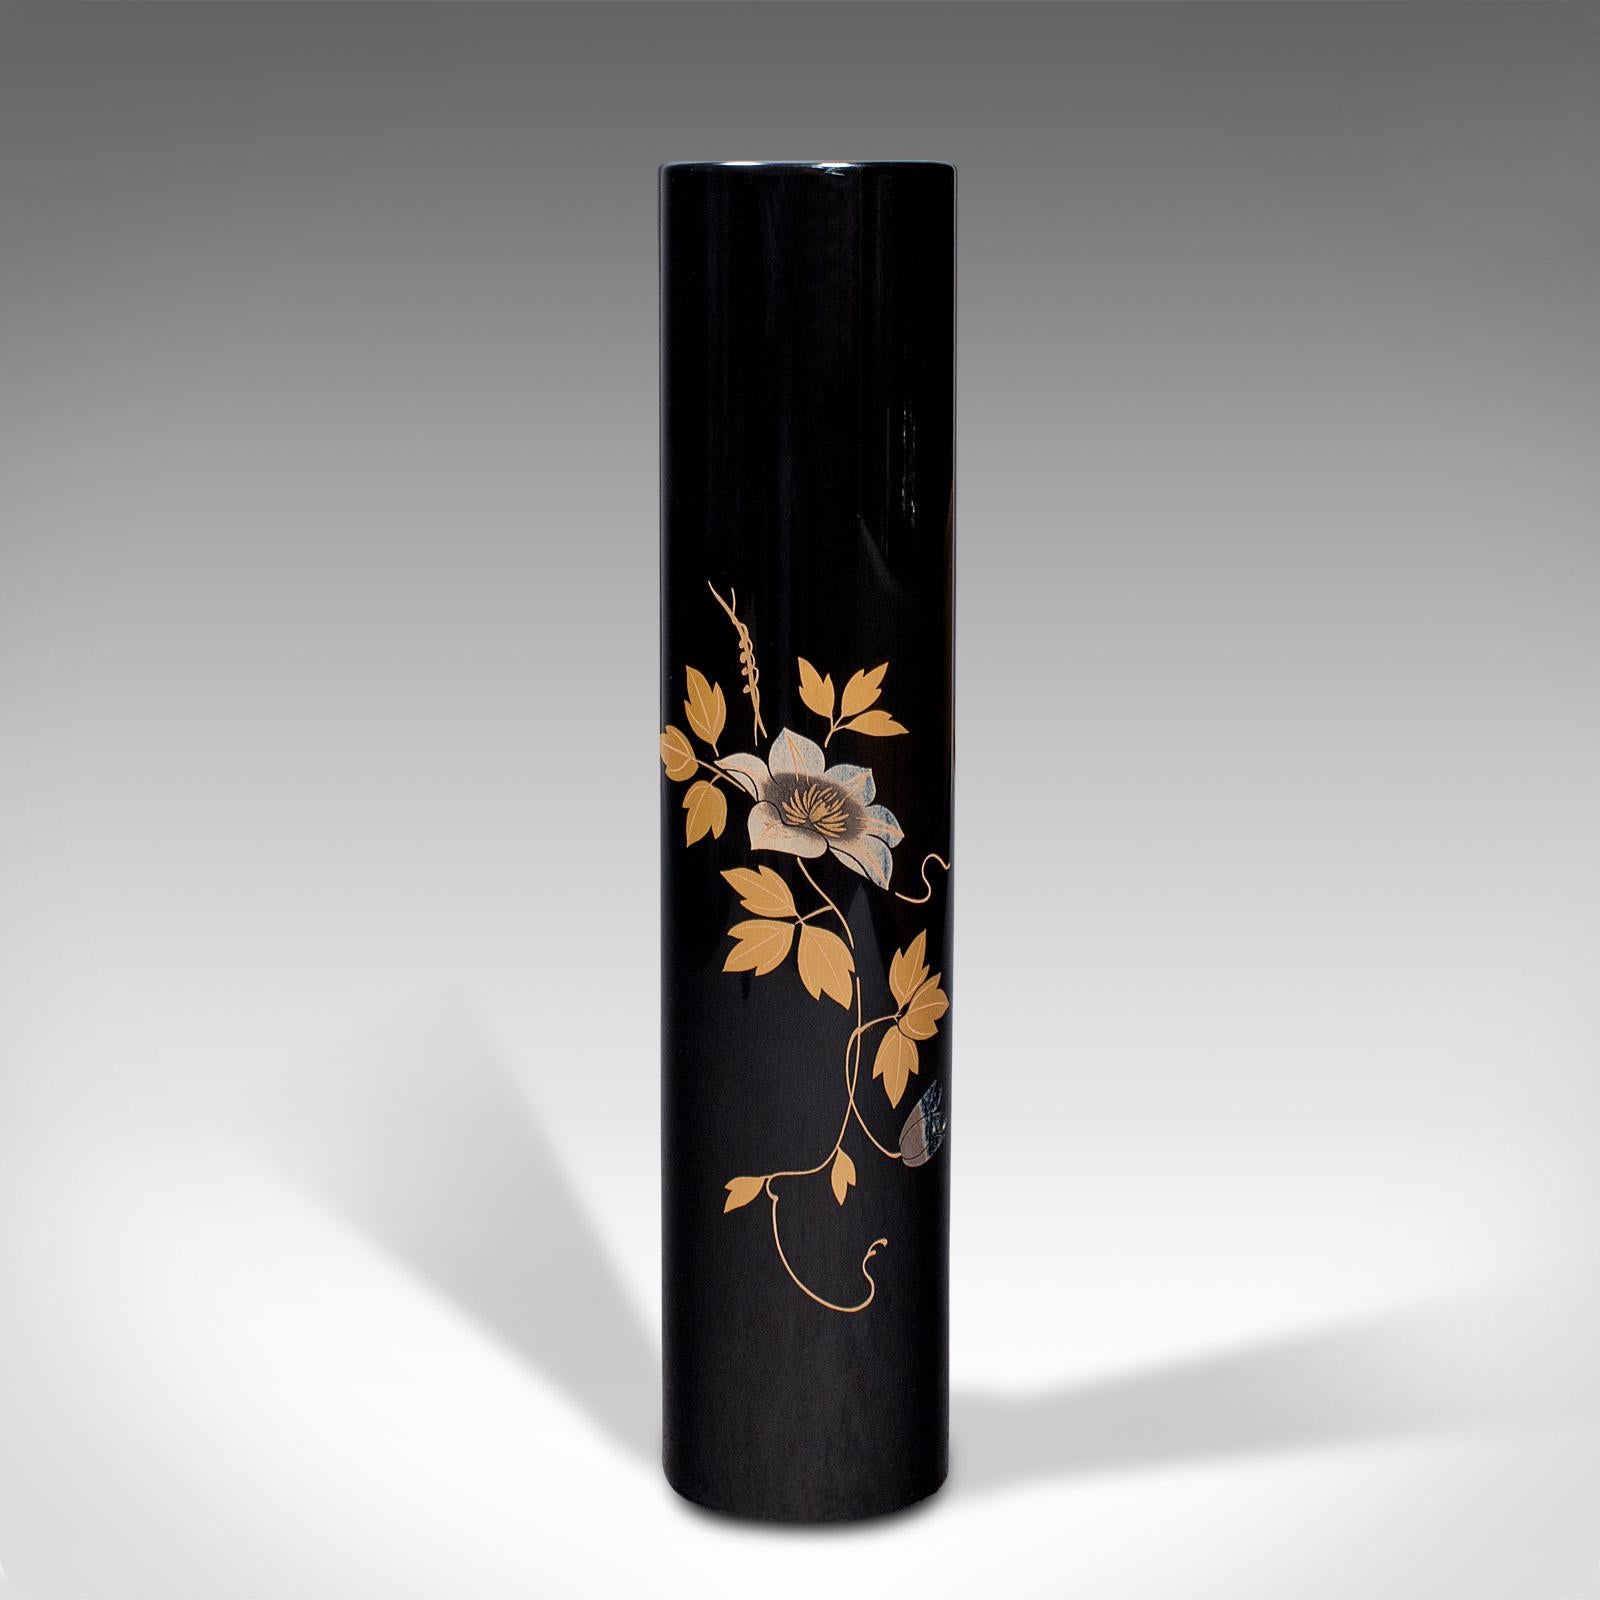 This is a small vintage stem vase. A Japanese, lacquered slimline posy pot, dating to the late Art Deco period, circa 1940.

Deep black tonality with delightfully contrasting foliate detail
Displays a desirable aged patina and in good